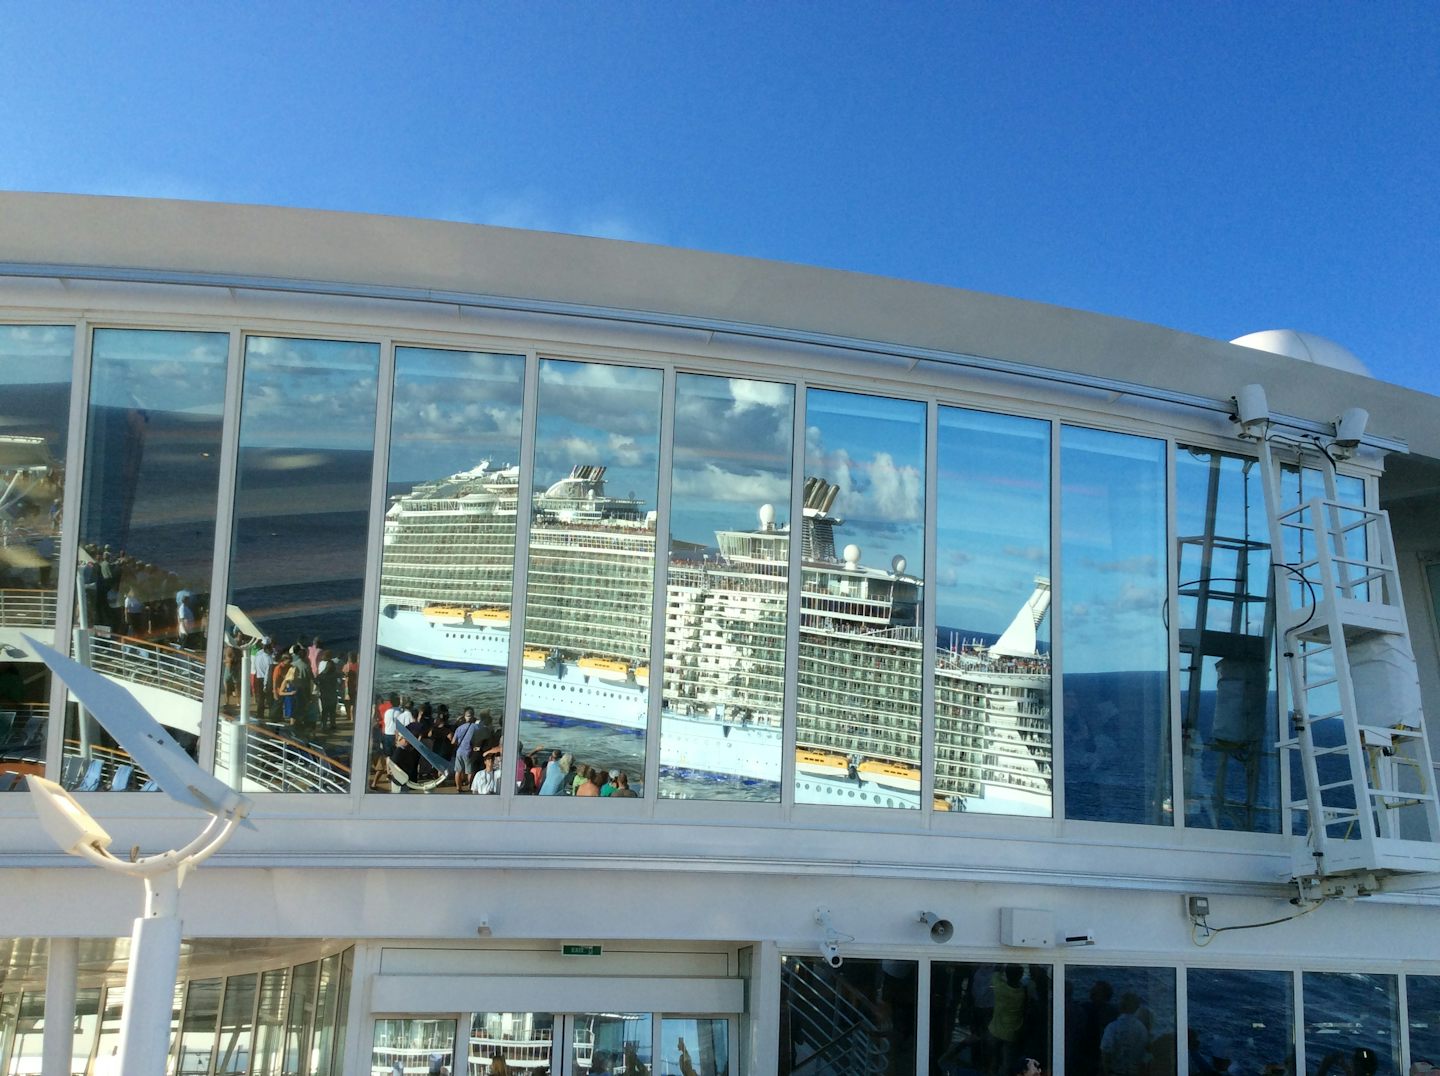 Meeting of Allure, Oasis, and Harmony outside of Fort Lauderdale as reflected in the top of the Harmony